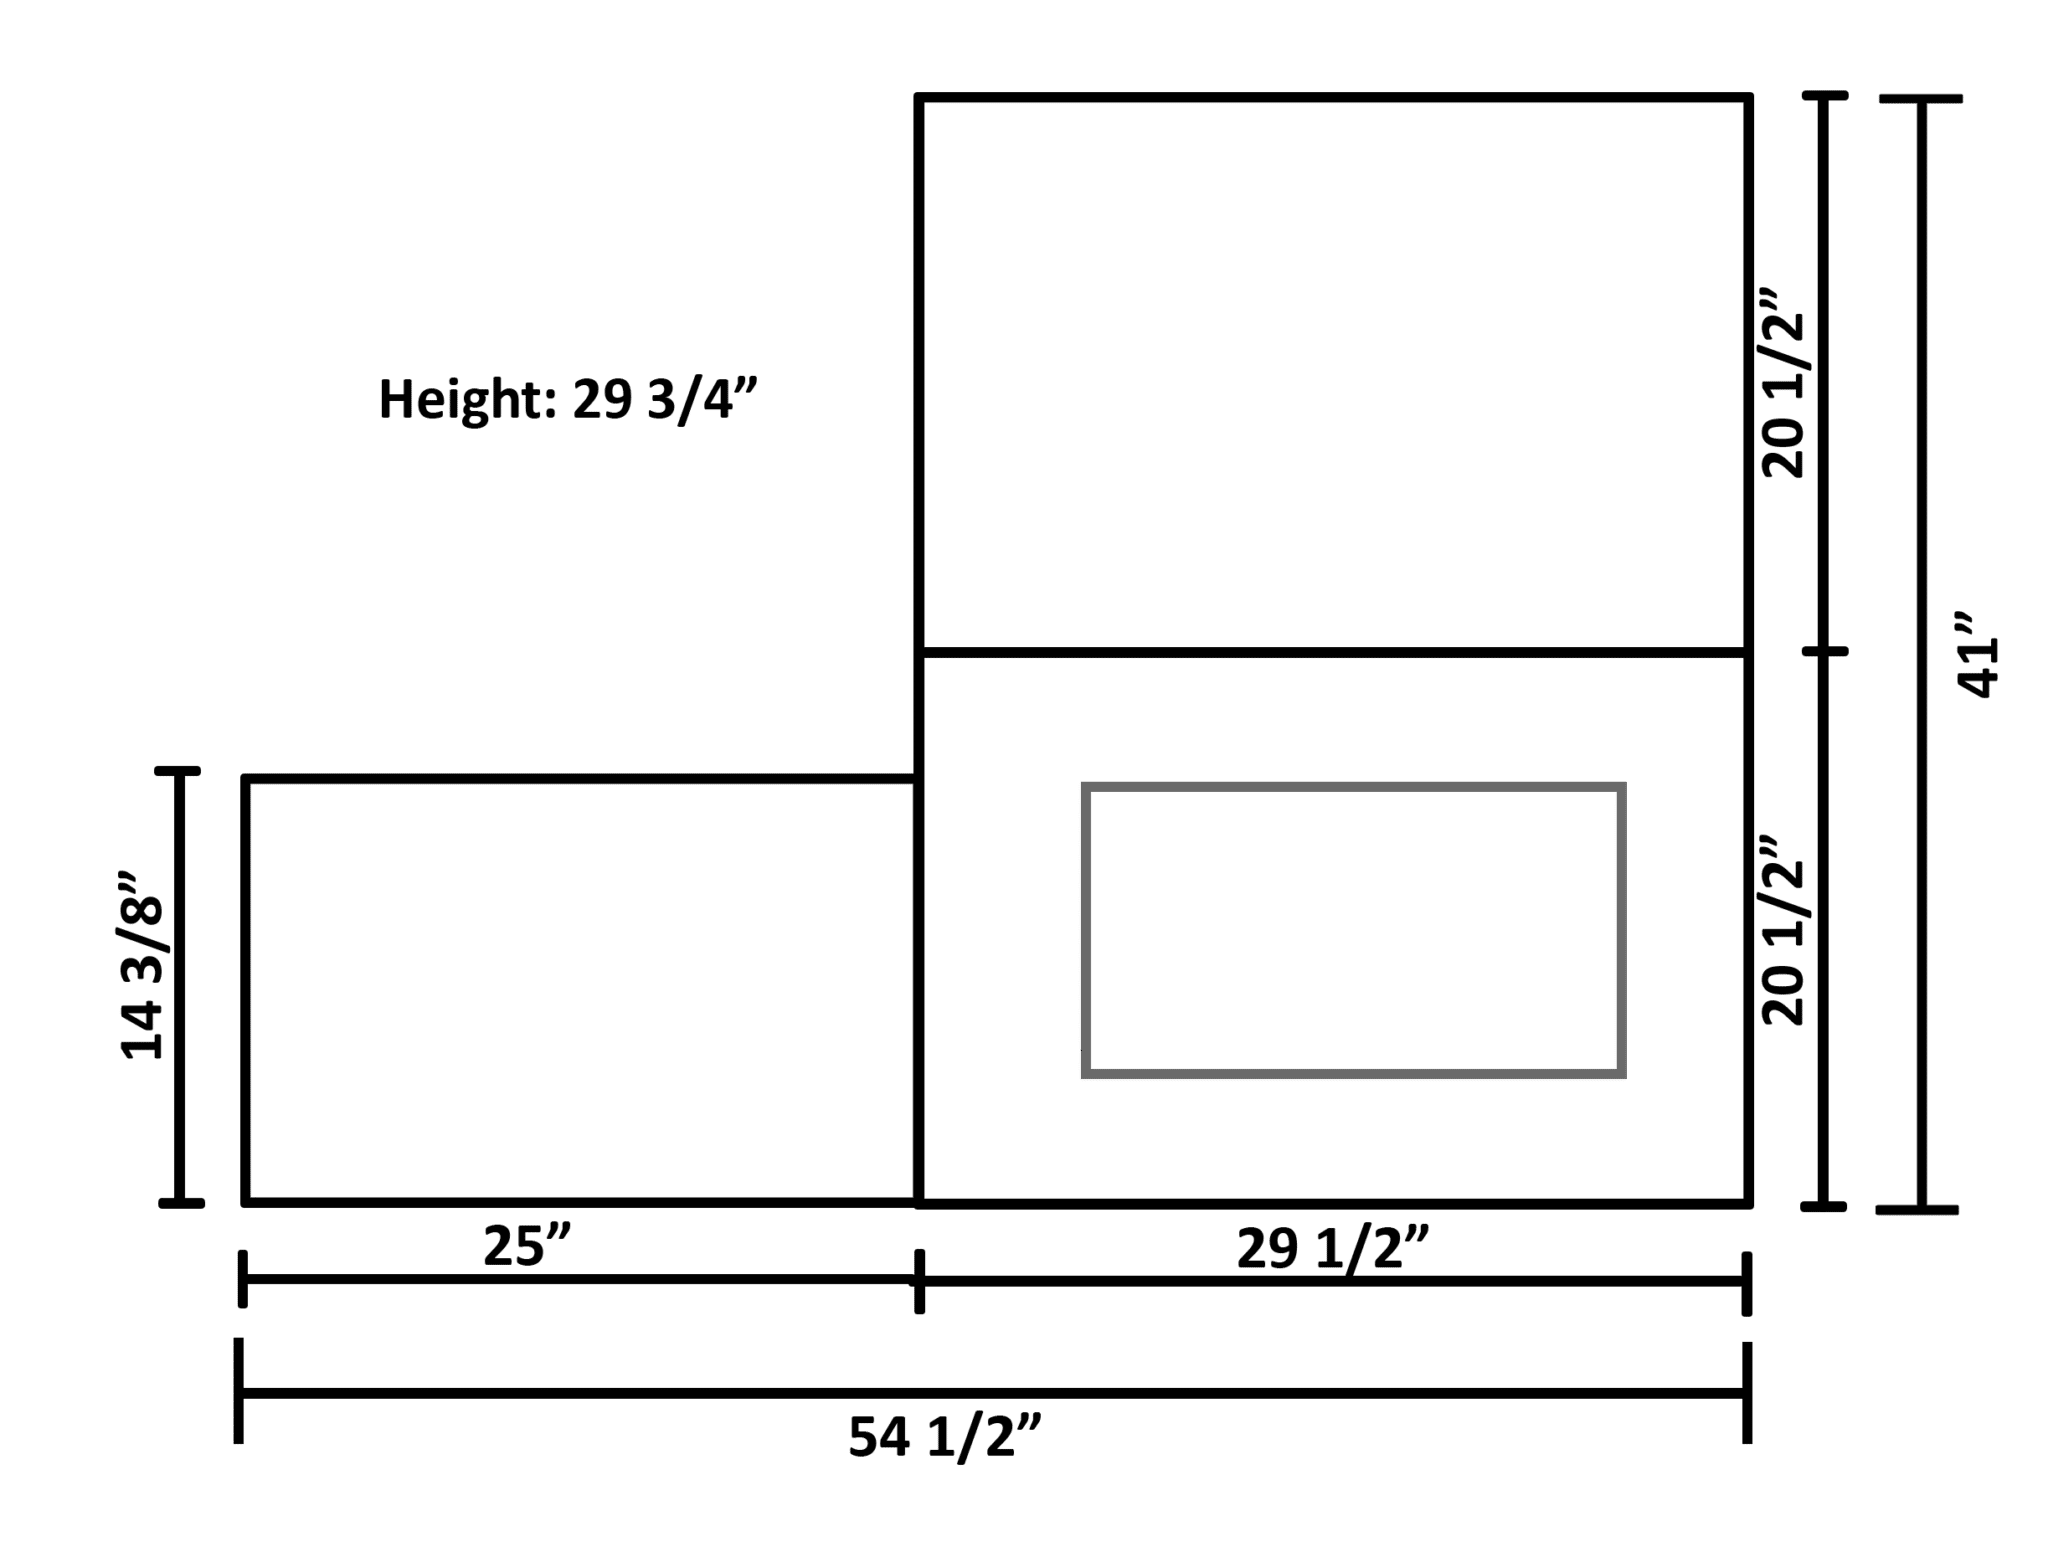 Diagram depicting the dimensions of the SewFine Quilter's Petite Cabinet